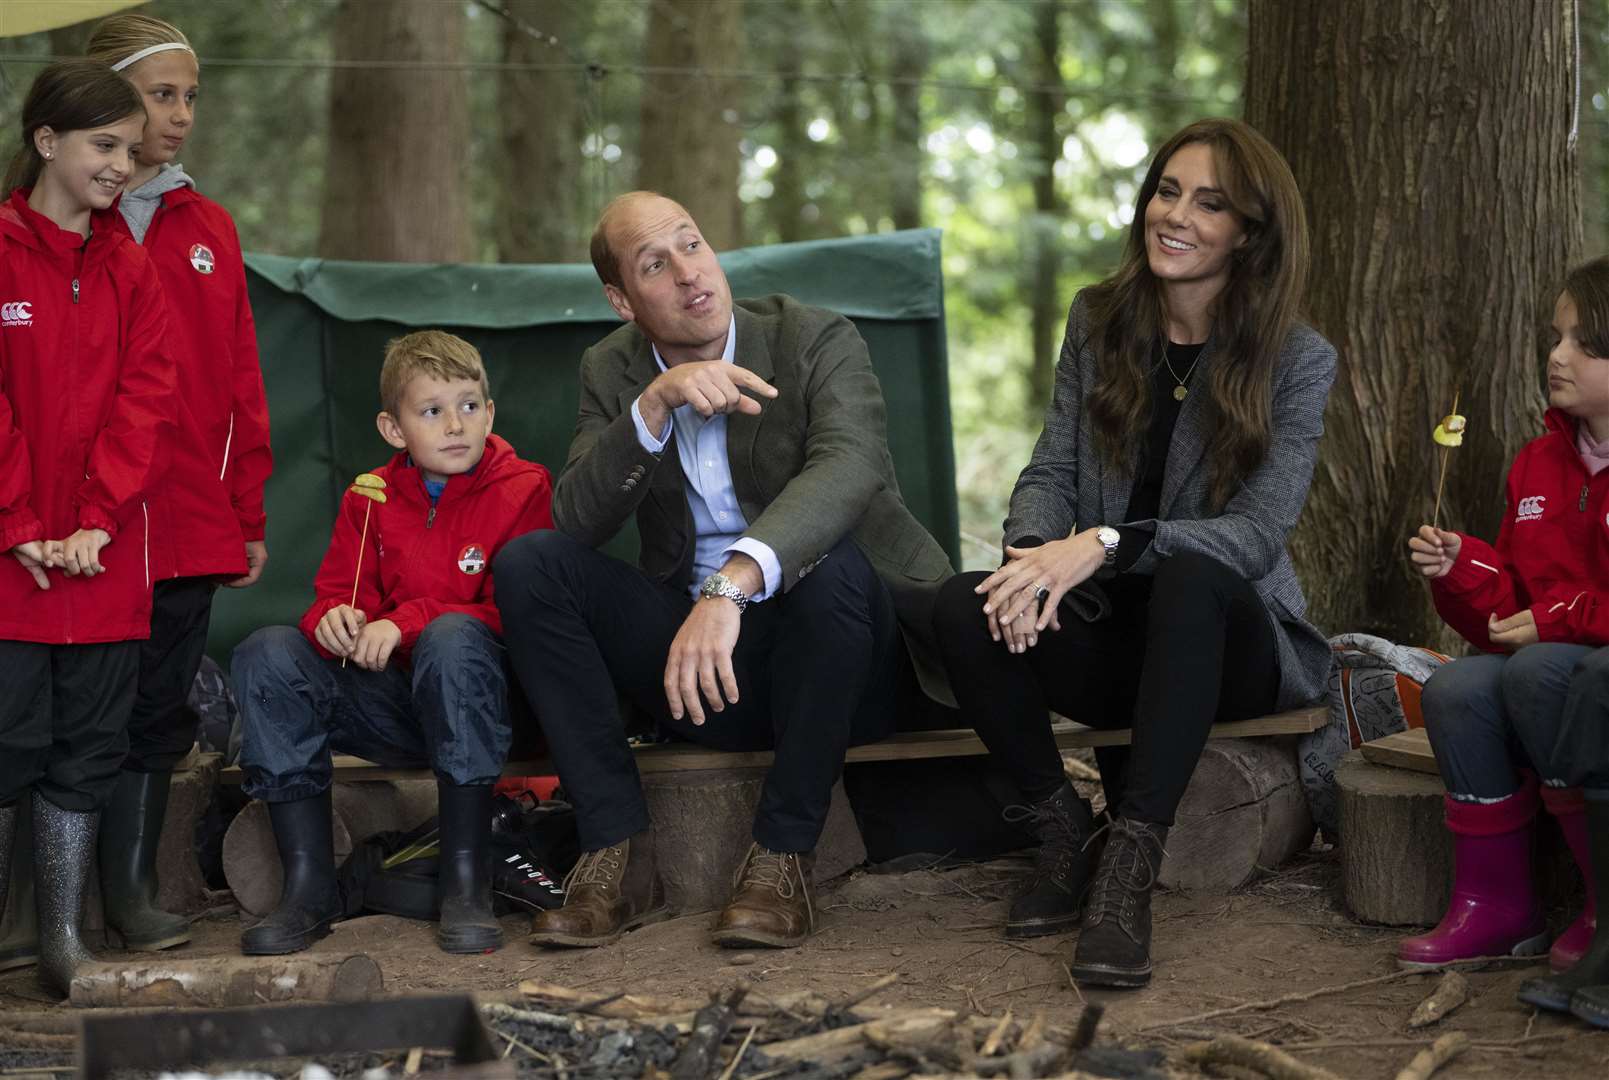 The royal couple joined the schoolchildren around a campfire at the Brampton Hill Wood site (David Rose/The Daily Telegraph/PA)